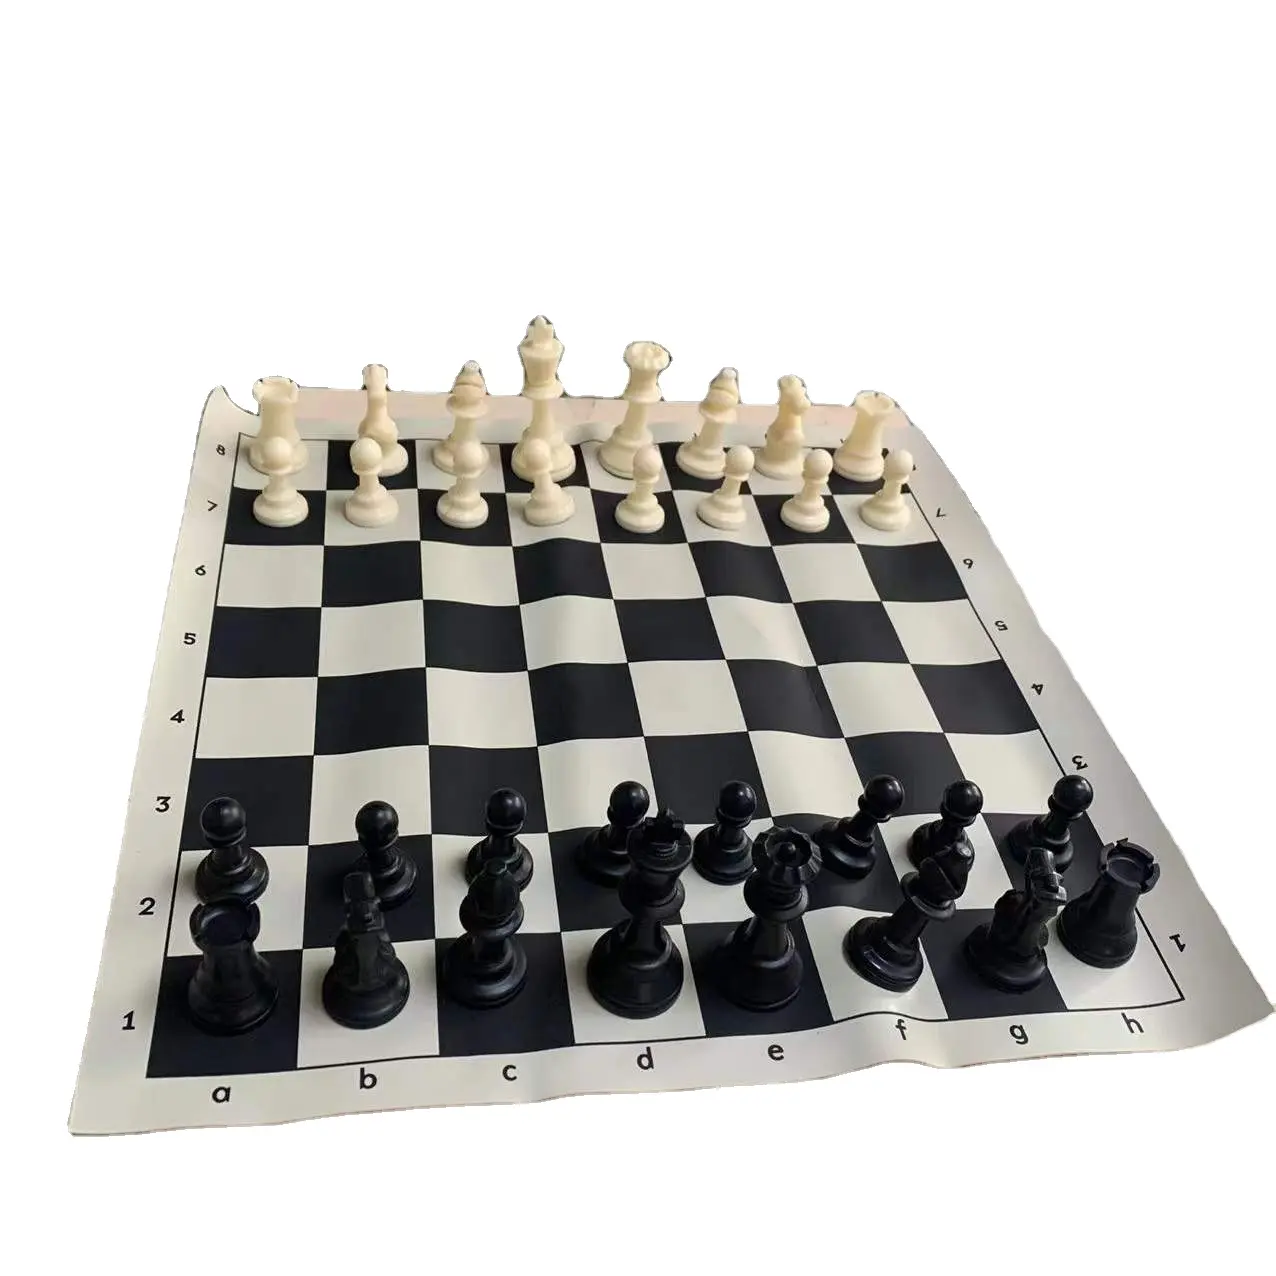 Best Value Tournament Chess Set Filled Chess Pieces and Black Roll-Up Vinyl Chess Board Uniker Brand